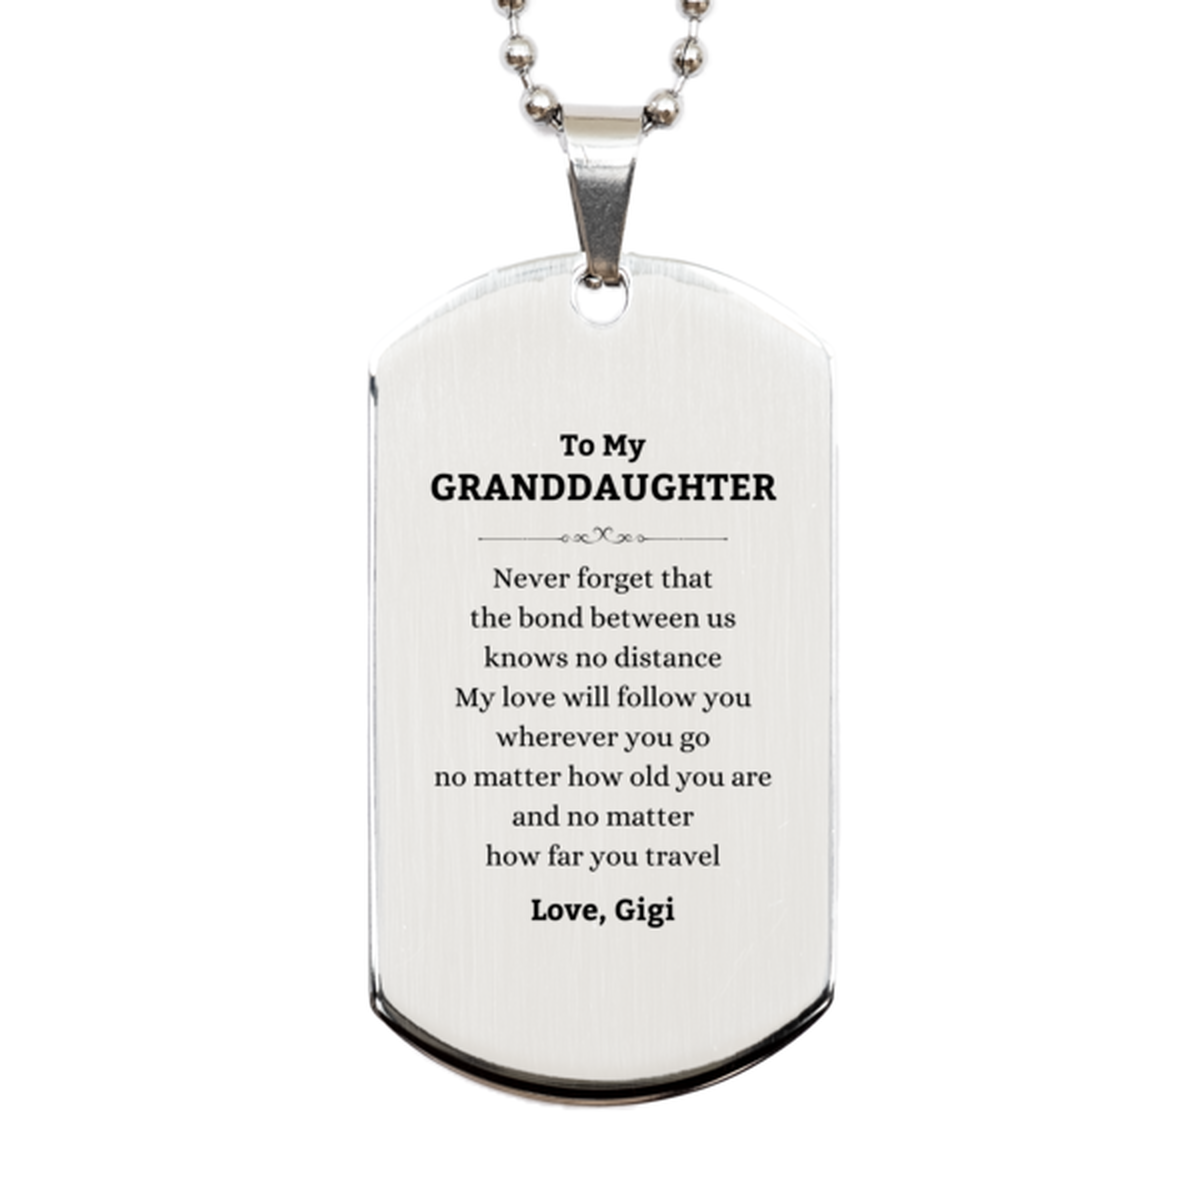 Granddaughter Birthday Gifts from Gigi, Adjustable Silver Dog Tag for Granddaughter Christmas Graduation Unique Gifts Granddaughter Never forget that the bond between us knows no distance. Love, Gigi